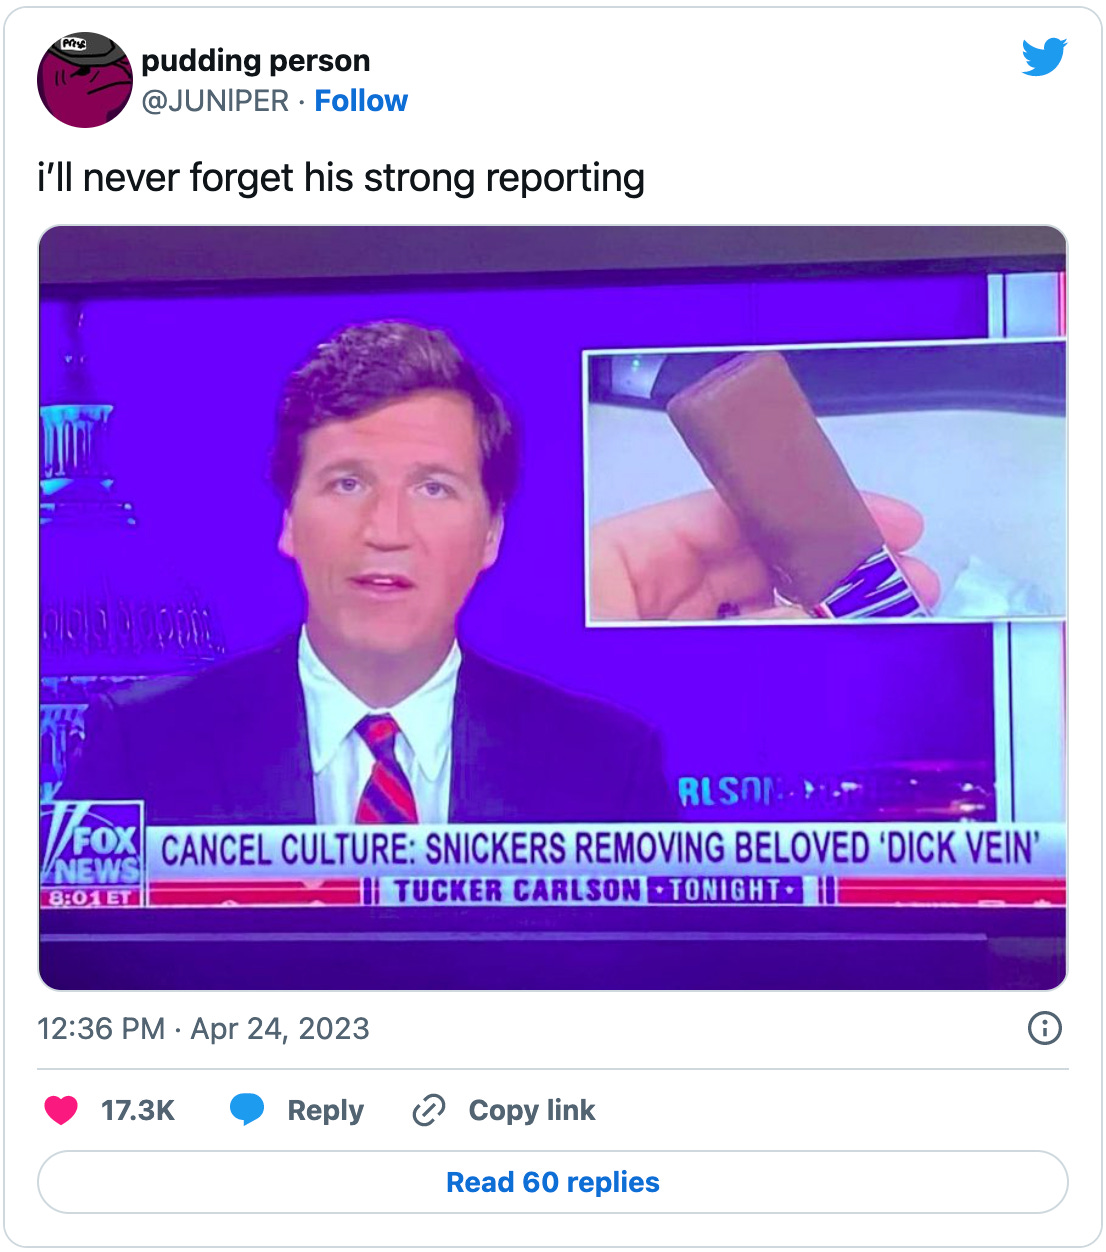 Tweet by @JUNlPER that reads “i’ll never forget his strong reporting” above a screenshot of Tucker with an OTS image of a smooth-topped Snickers bar and the chyron “CANCEL CULTURE: SNICKERS REMOVING BELOVED ‘DICK VEIN’” which, before you tell me, I’m pretty sure was a hoax.